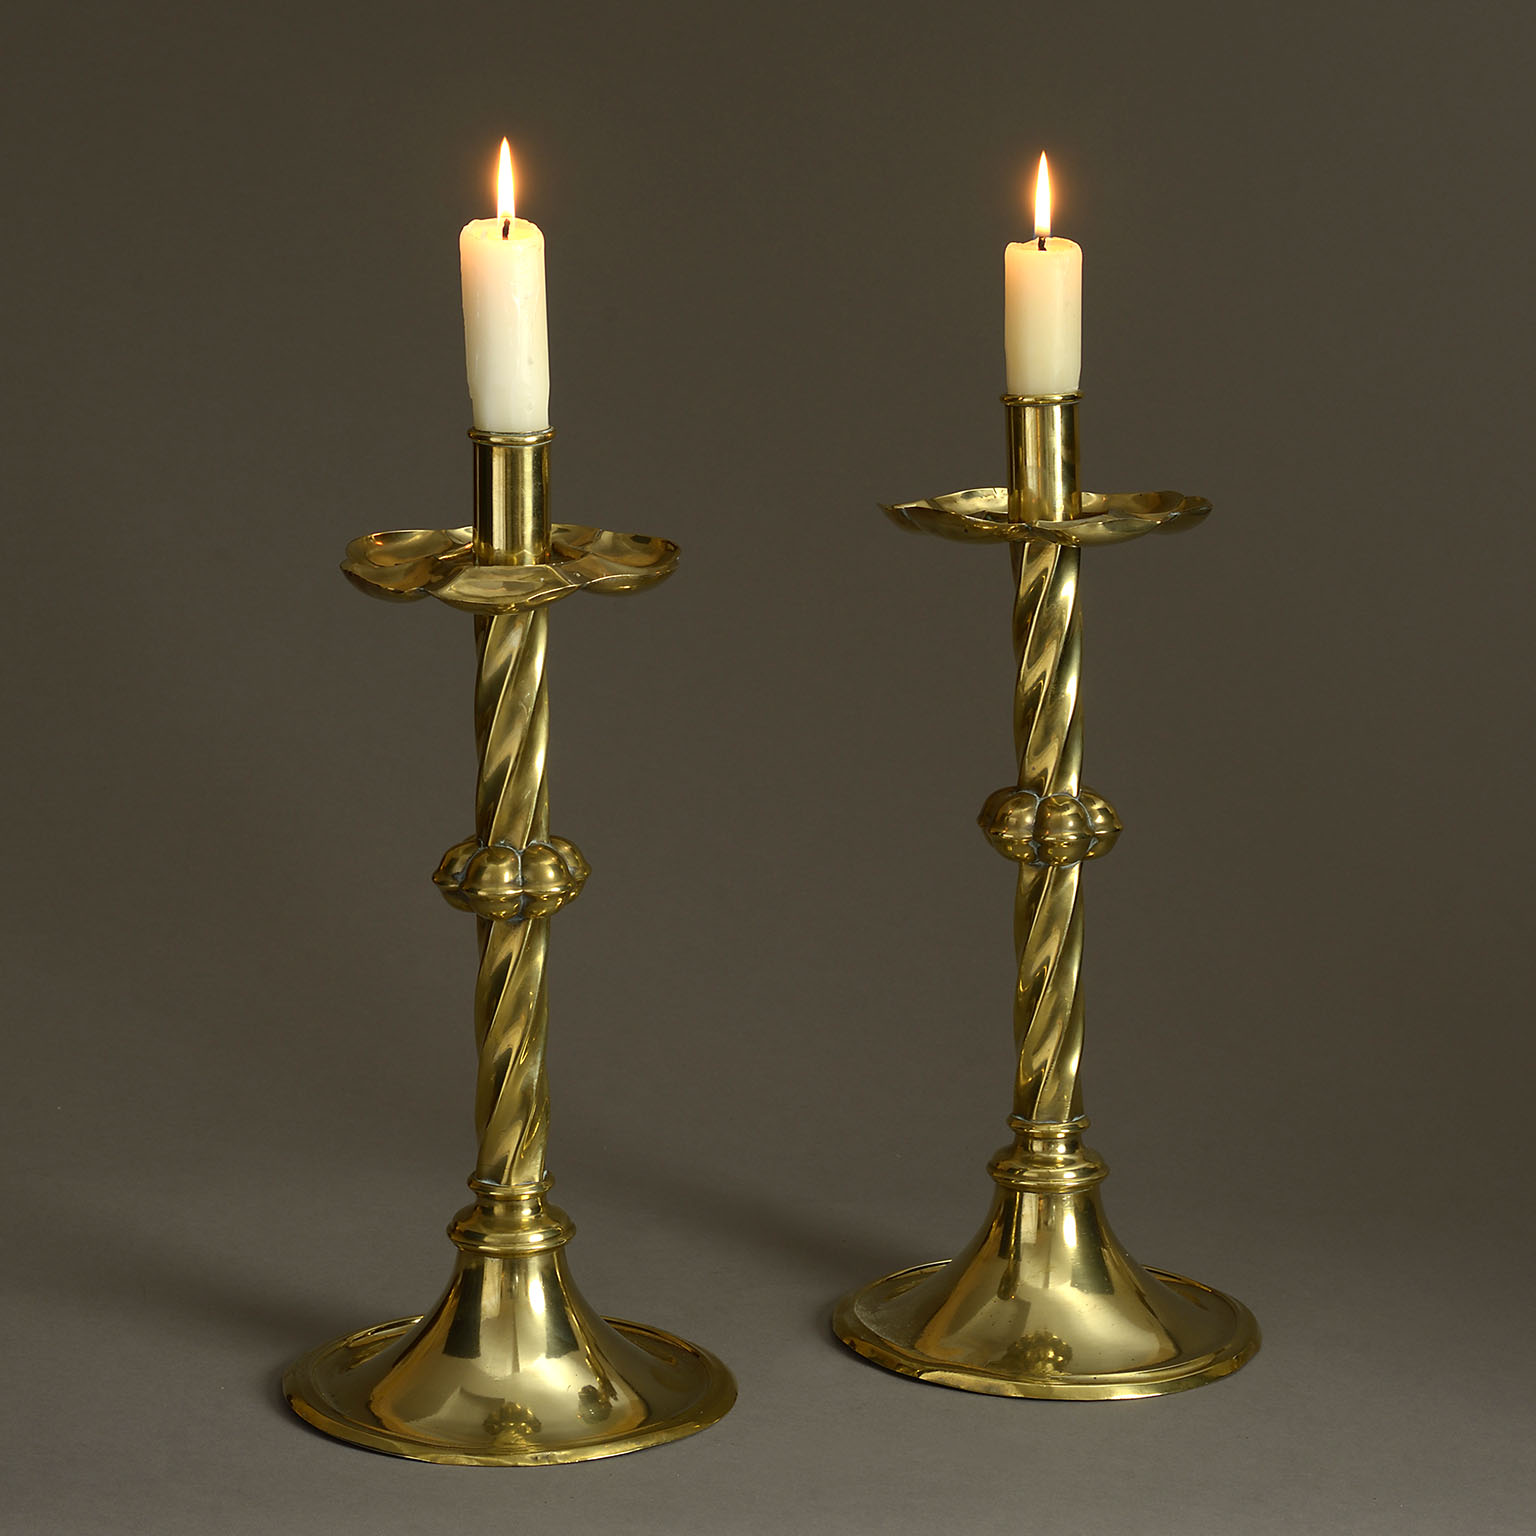 Large Pair of Mid-19th Century Victorian Brass Candlesticks